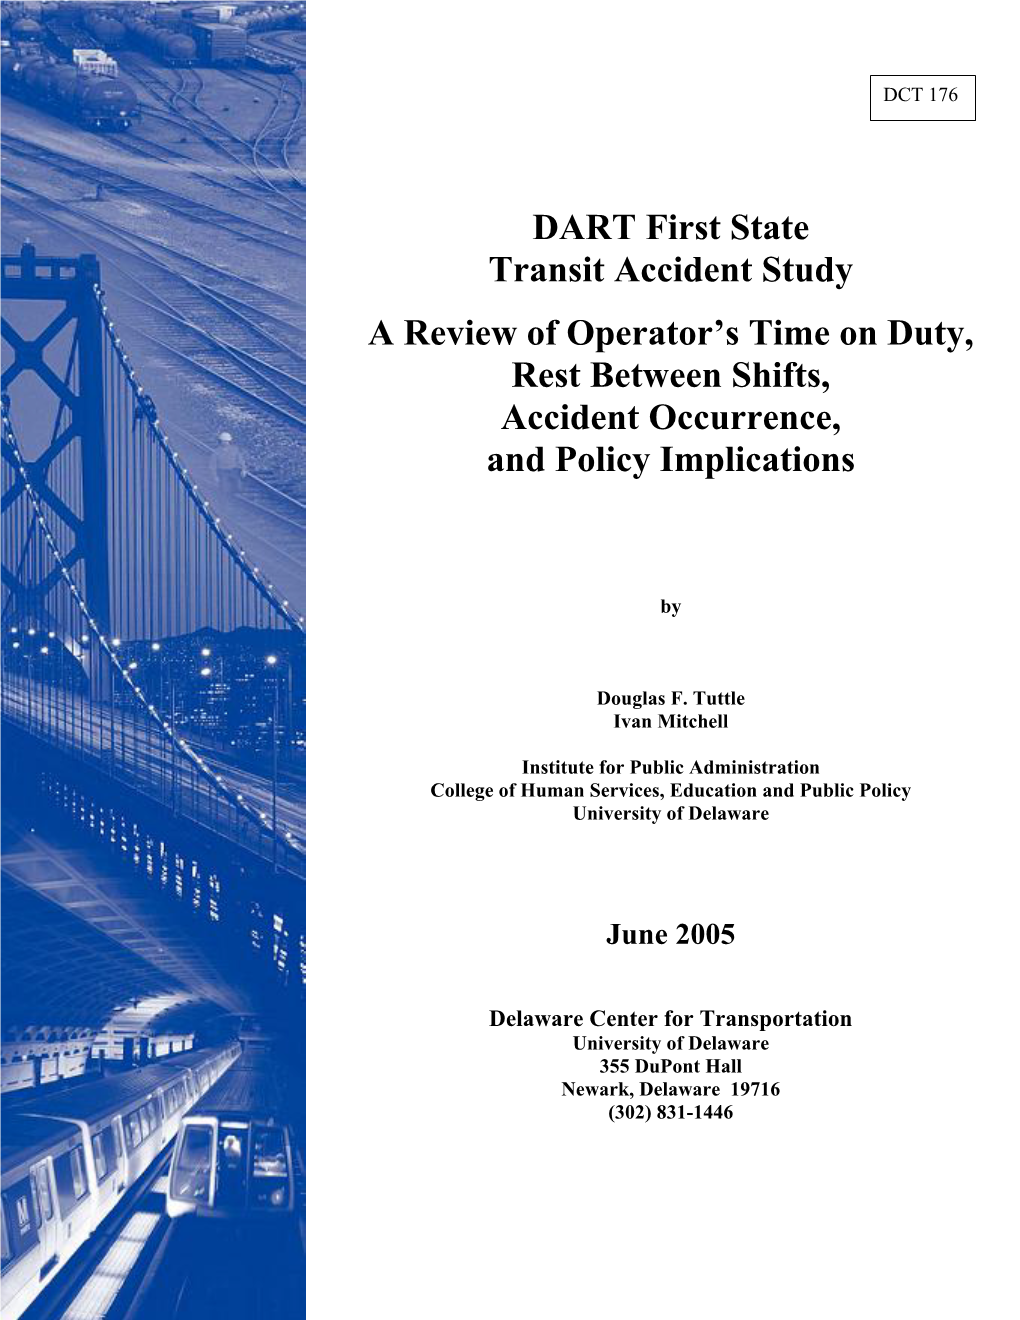 DART First State Transit Accident Study